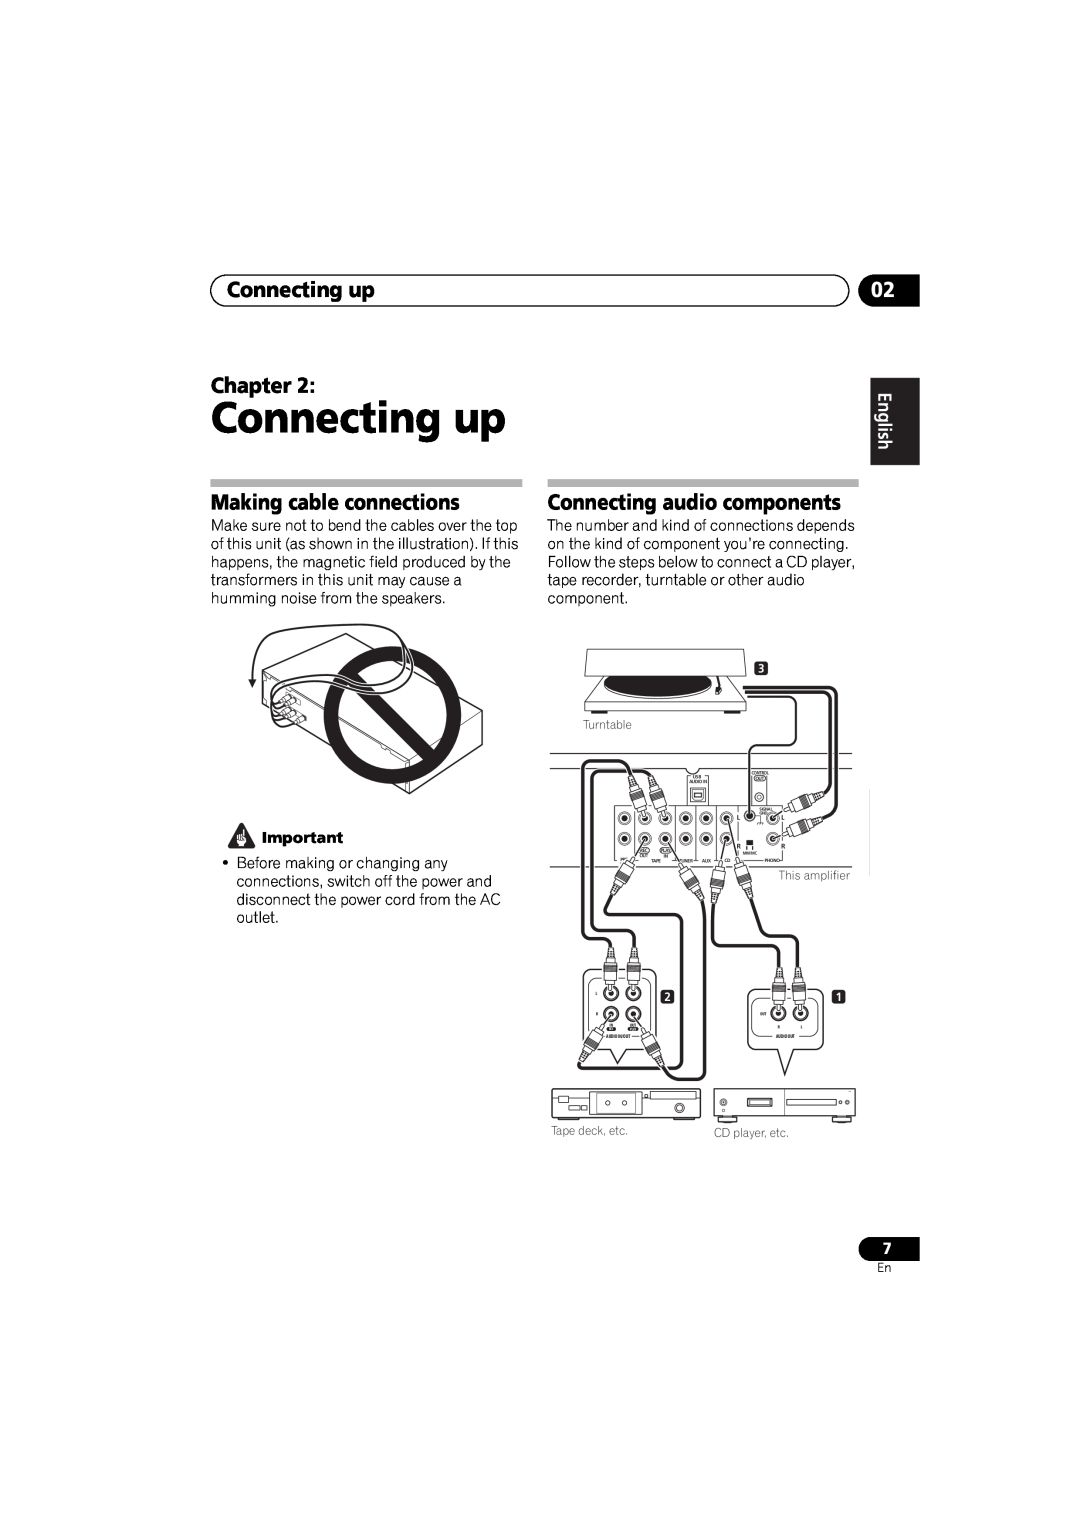 Pioneer A-A9-J manual Connecting up Chapter, Making cable connections, Connecting audio components, English, Italiano 